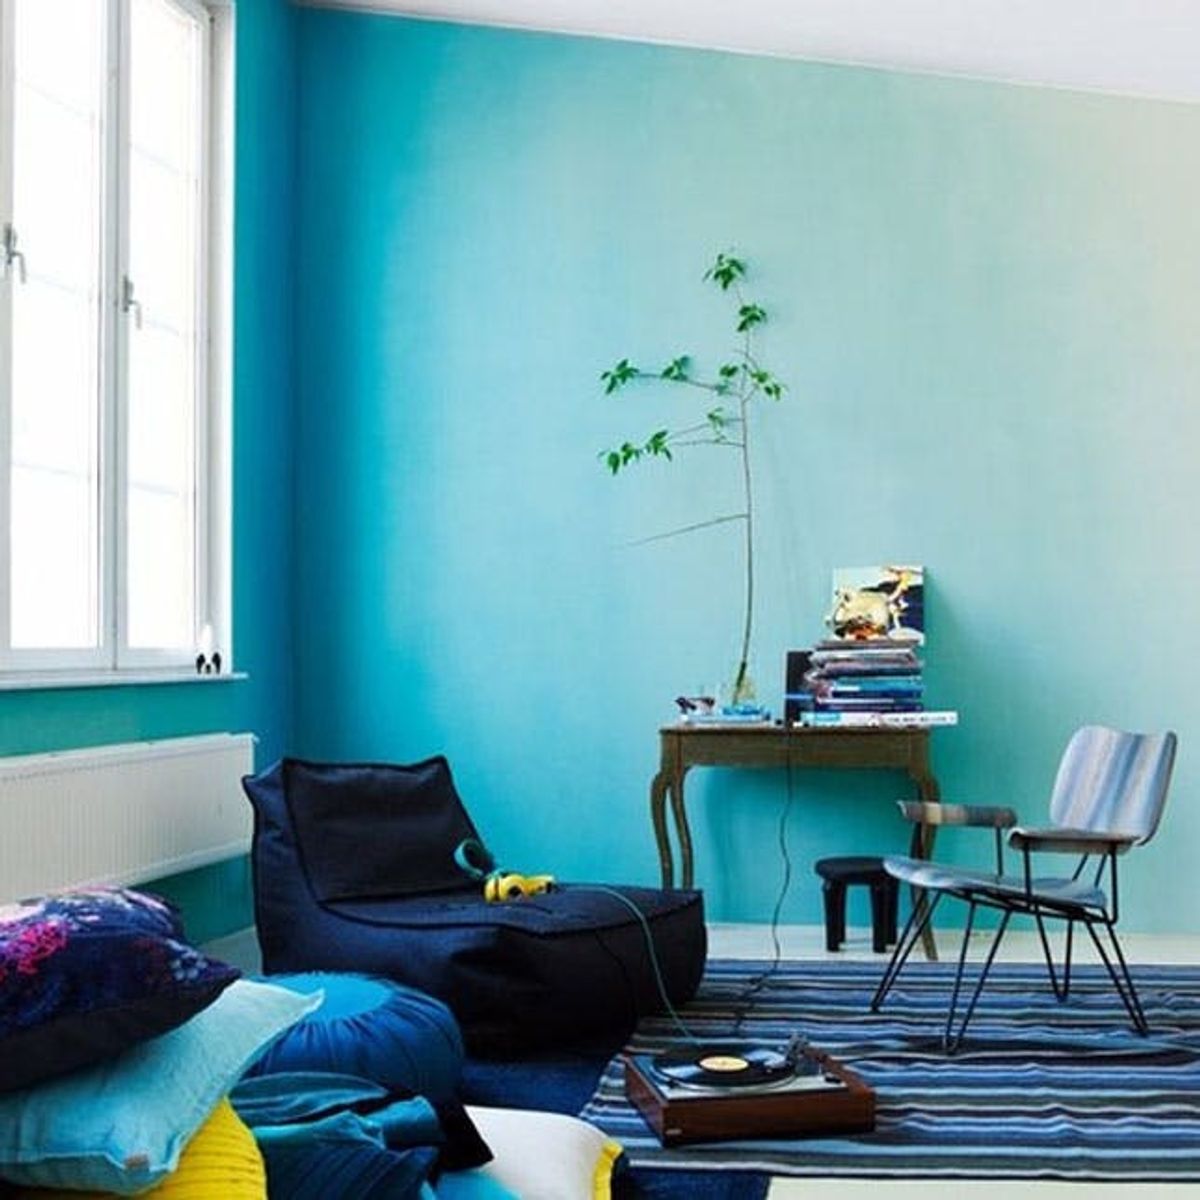 The 3 Most Relaxing Colors for Your Bedroom